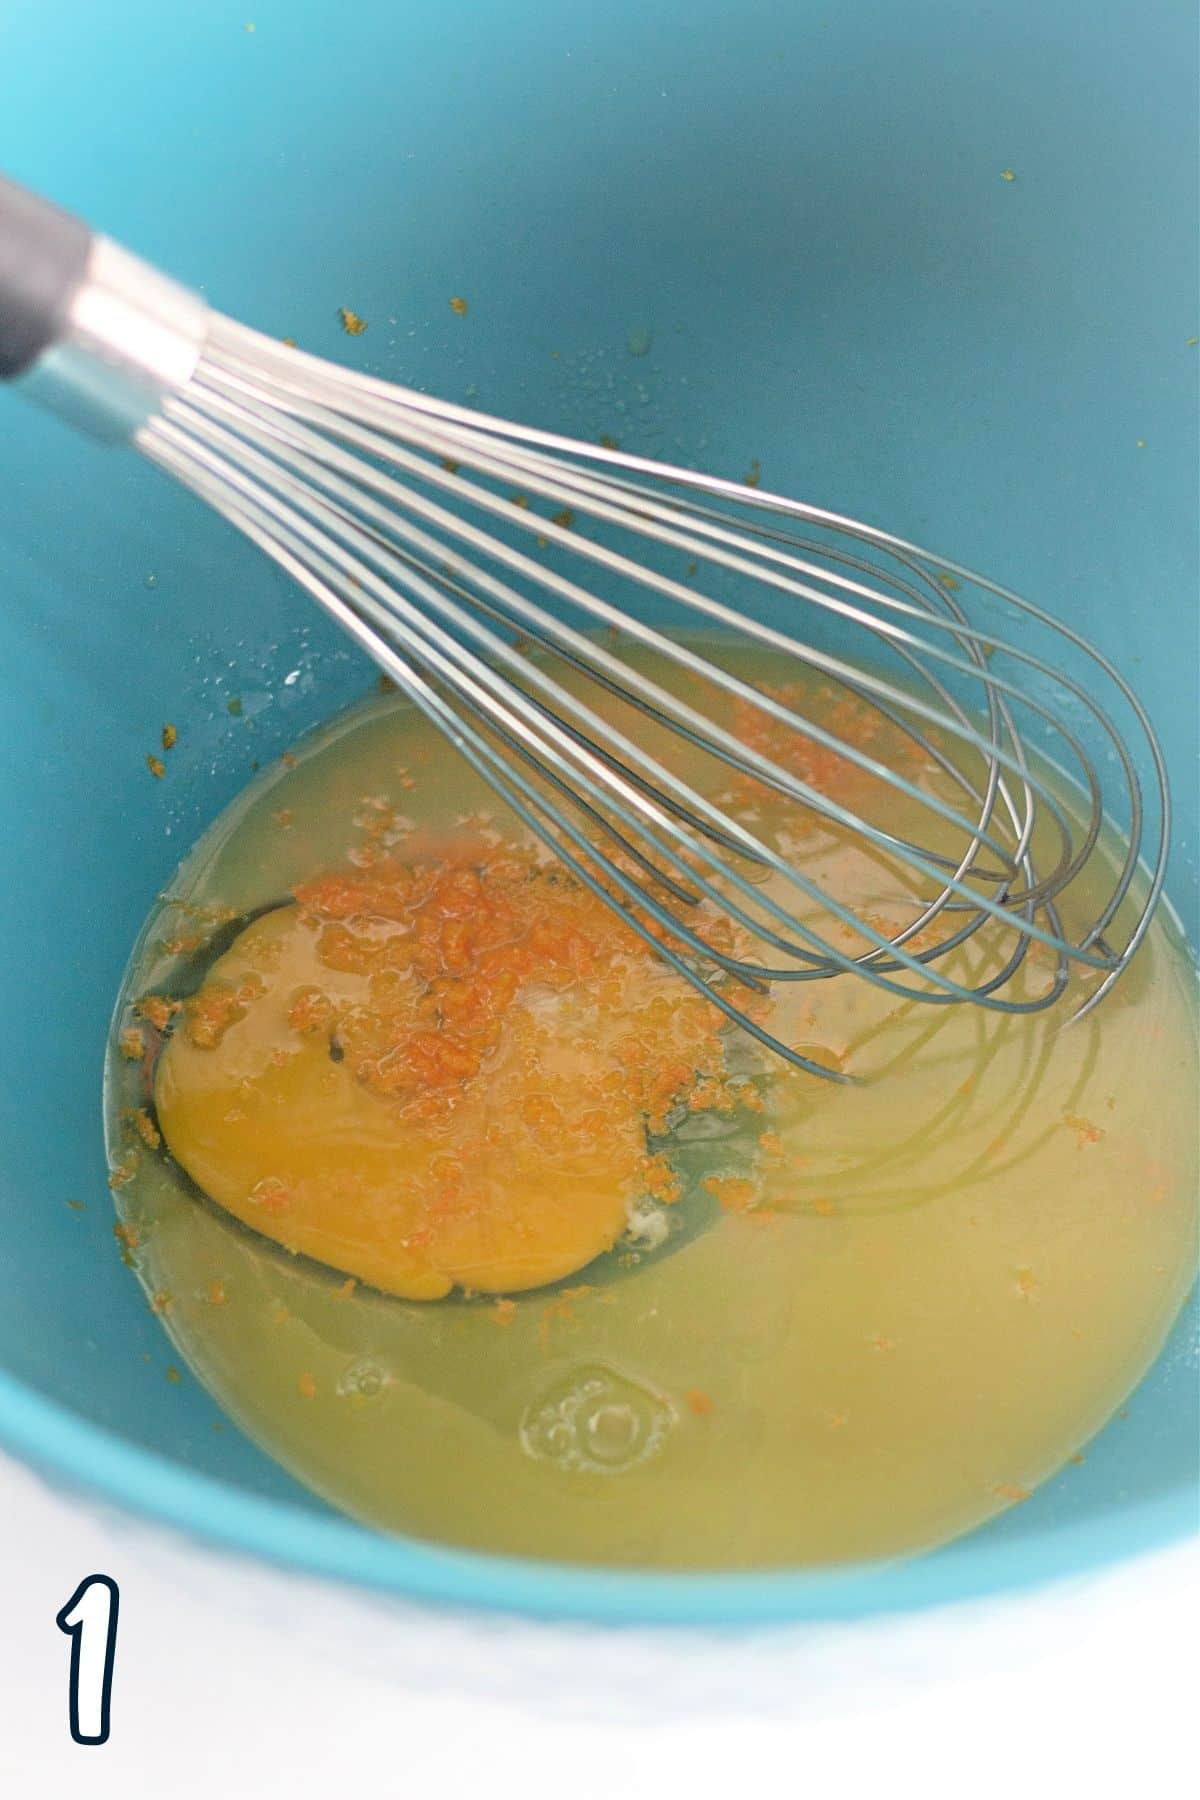 Egg, orange juice, and sugar in a mixing bowl with a whisk. 